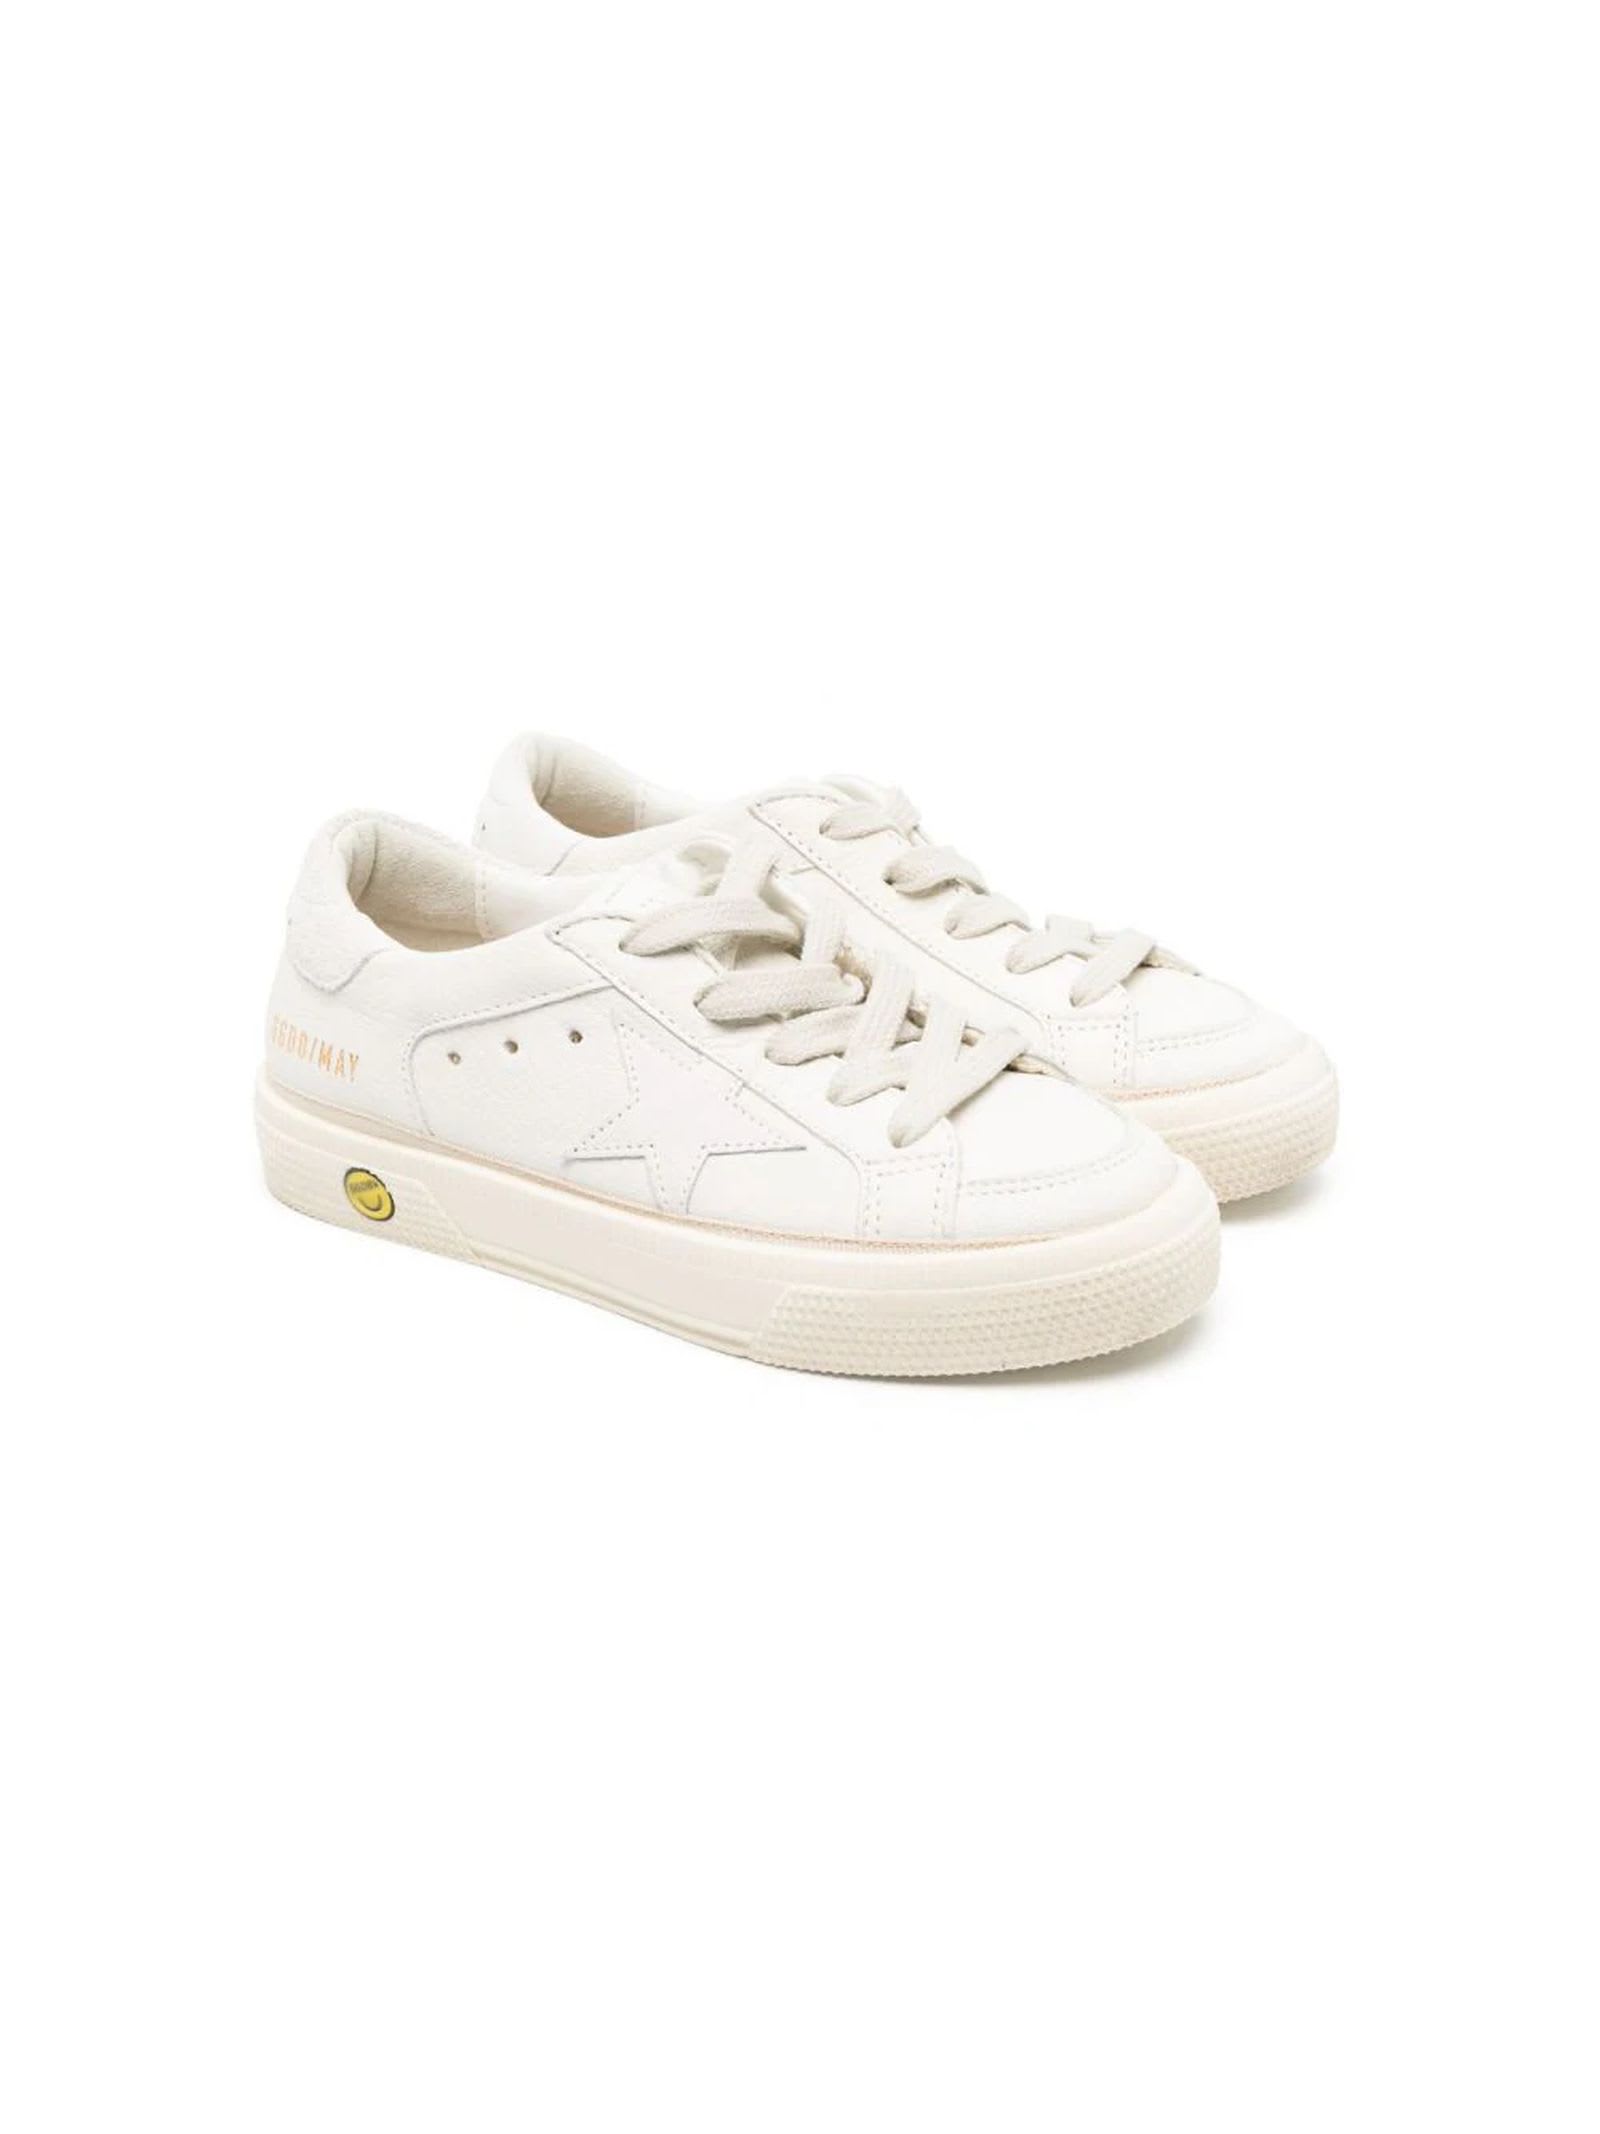 GOLDEN GOOSE OFF-WHITE CALF LEATHER SNEAKERS